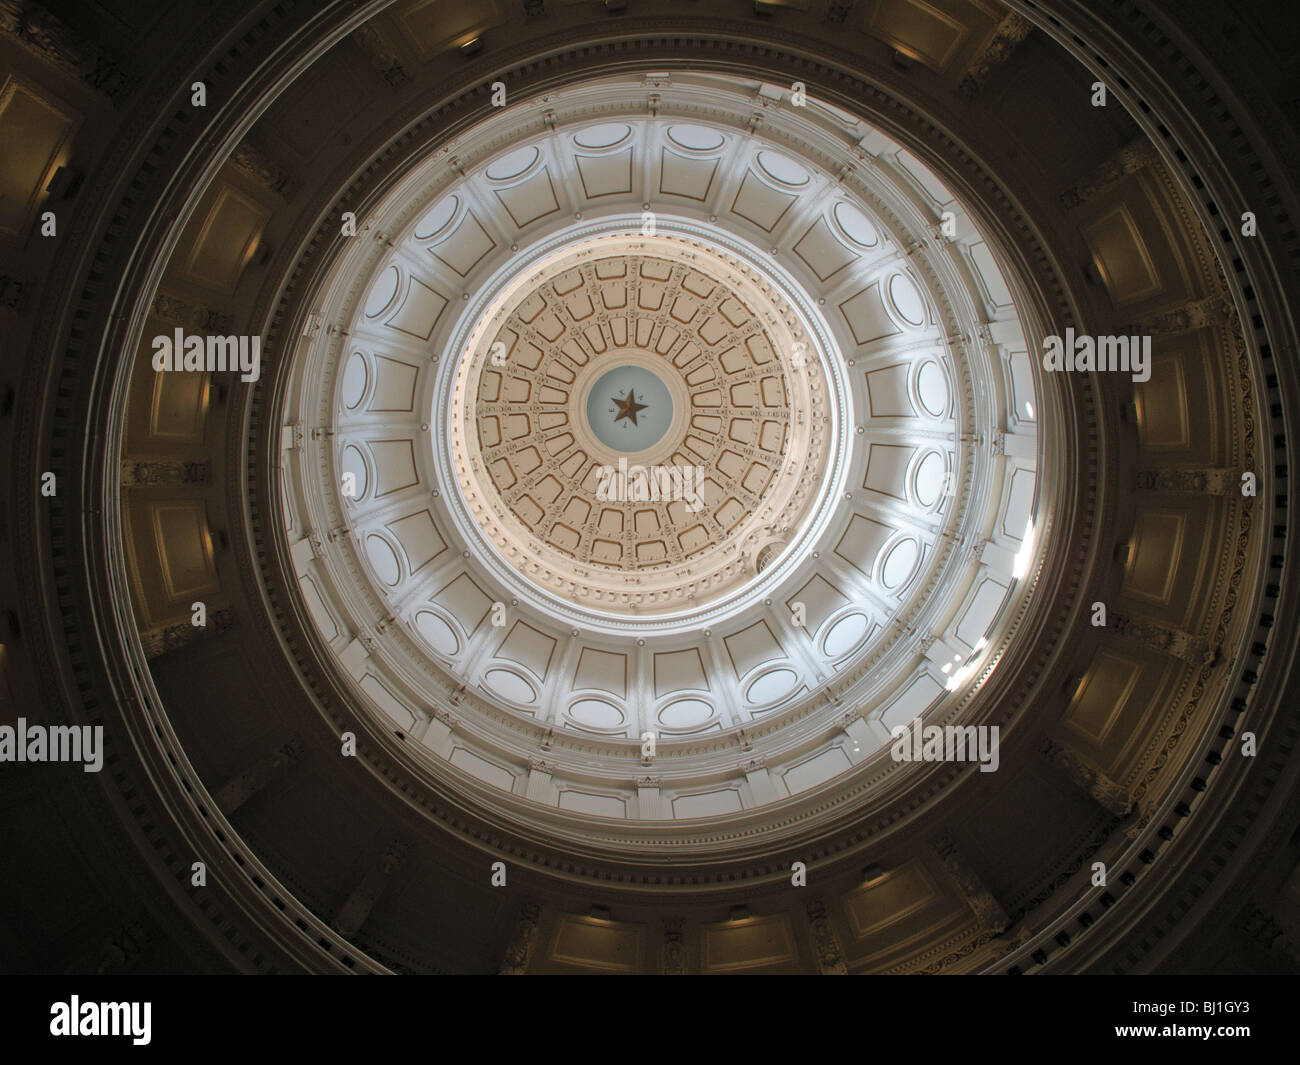 Austin Texas State Capitol building interior dome ceiling Stock Photo